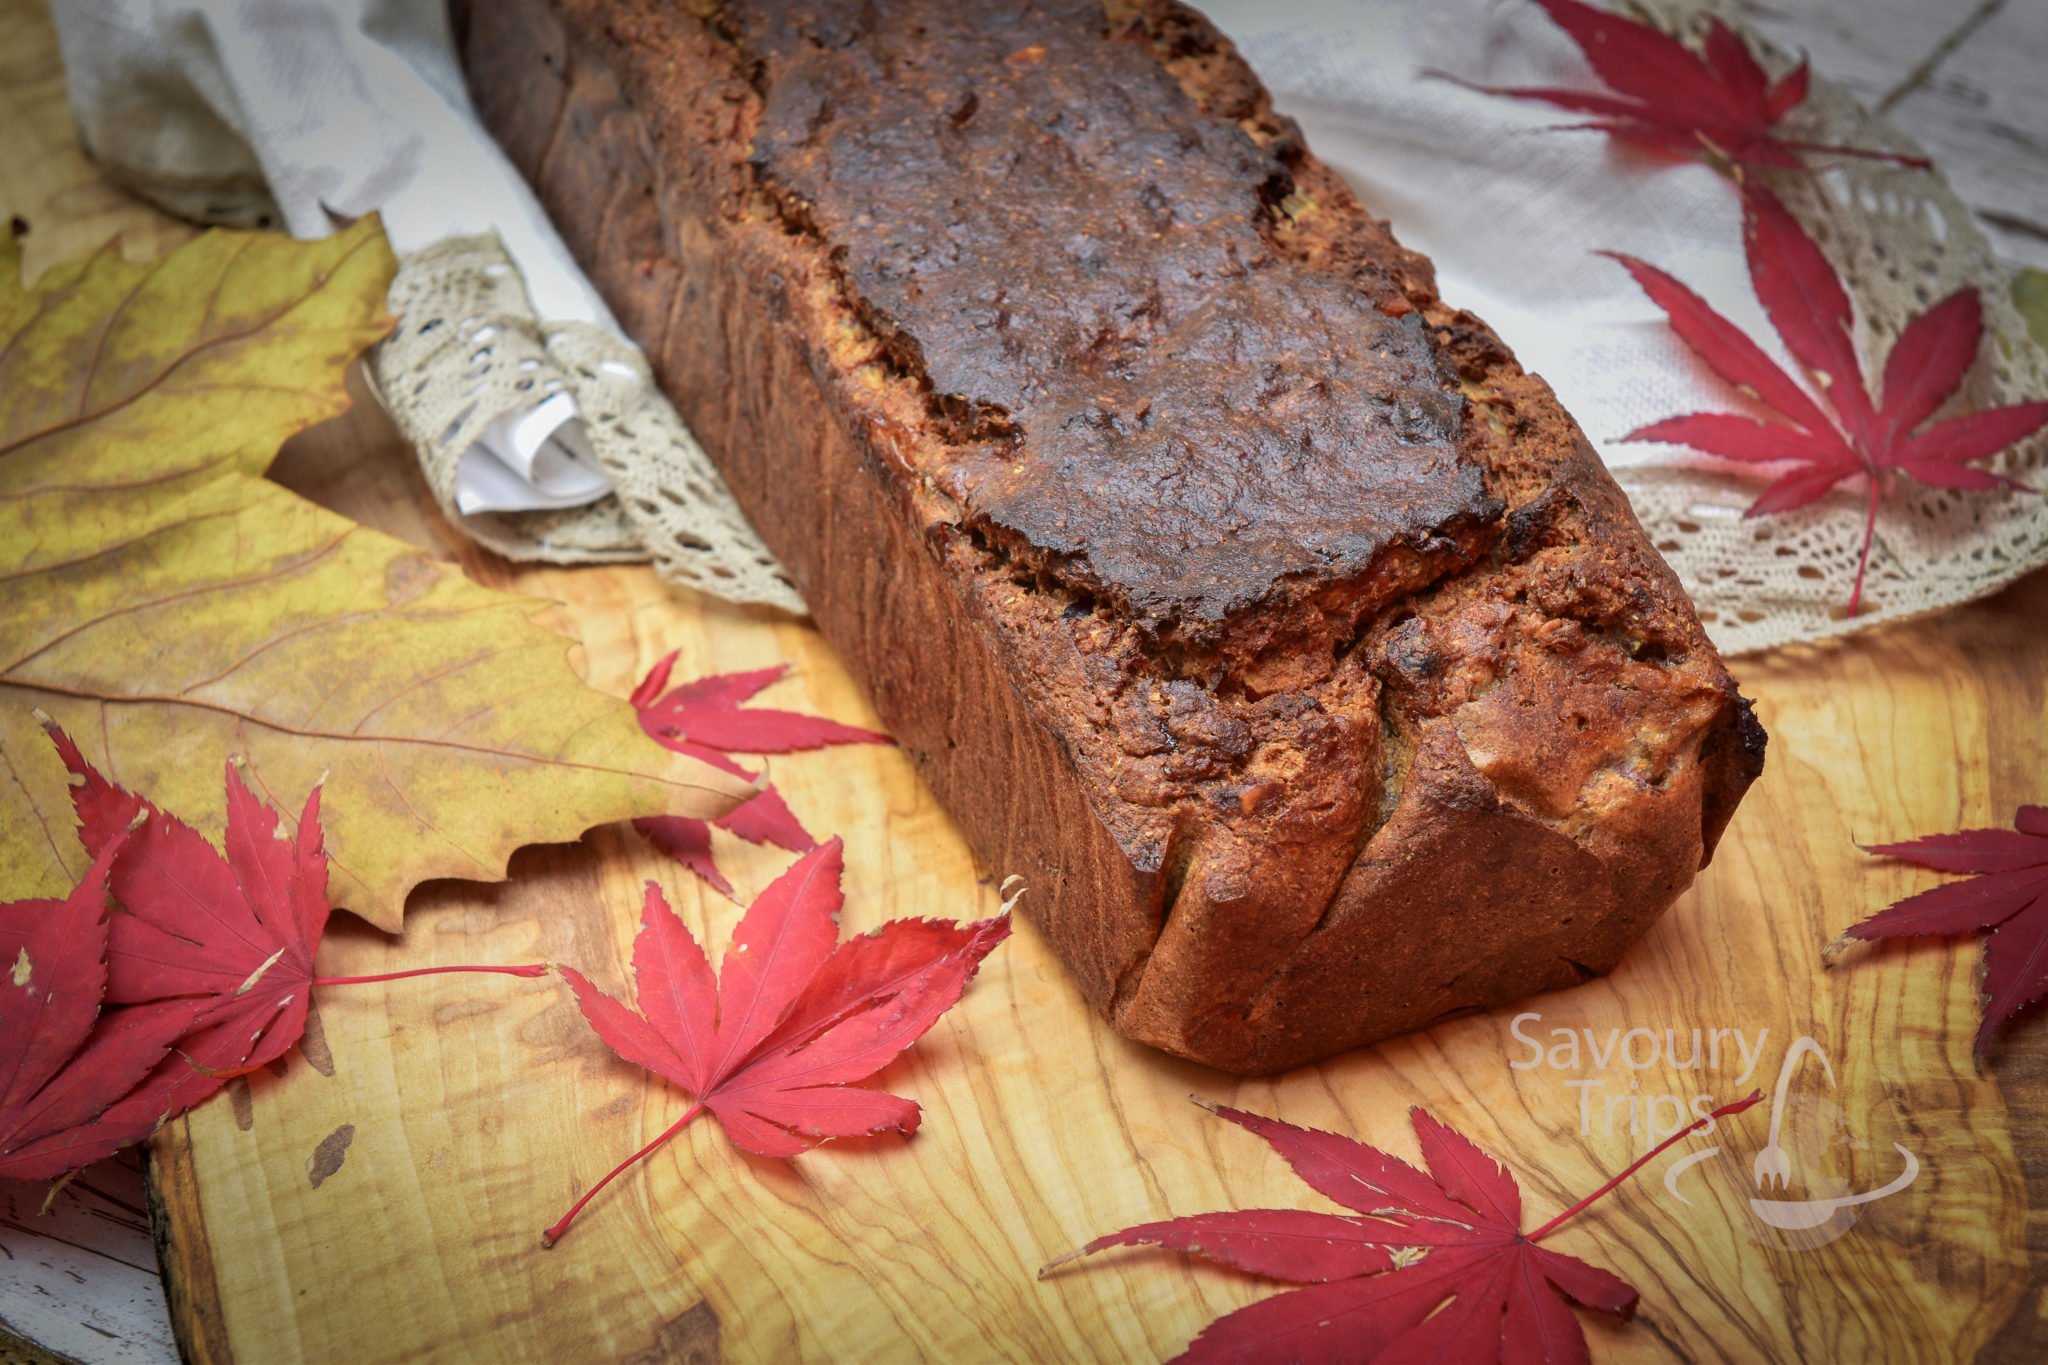 The best homemade the healthiest banana bread?